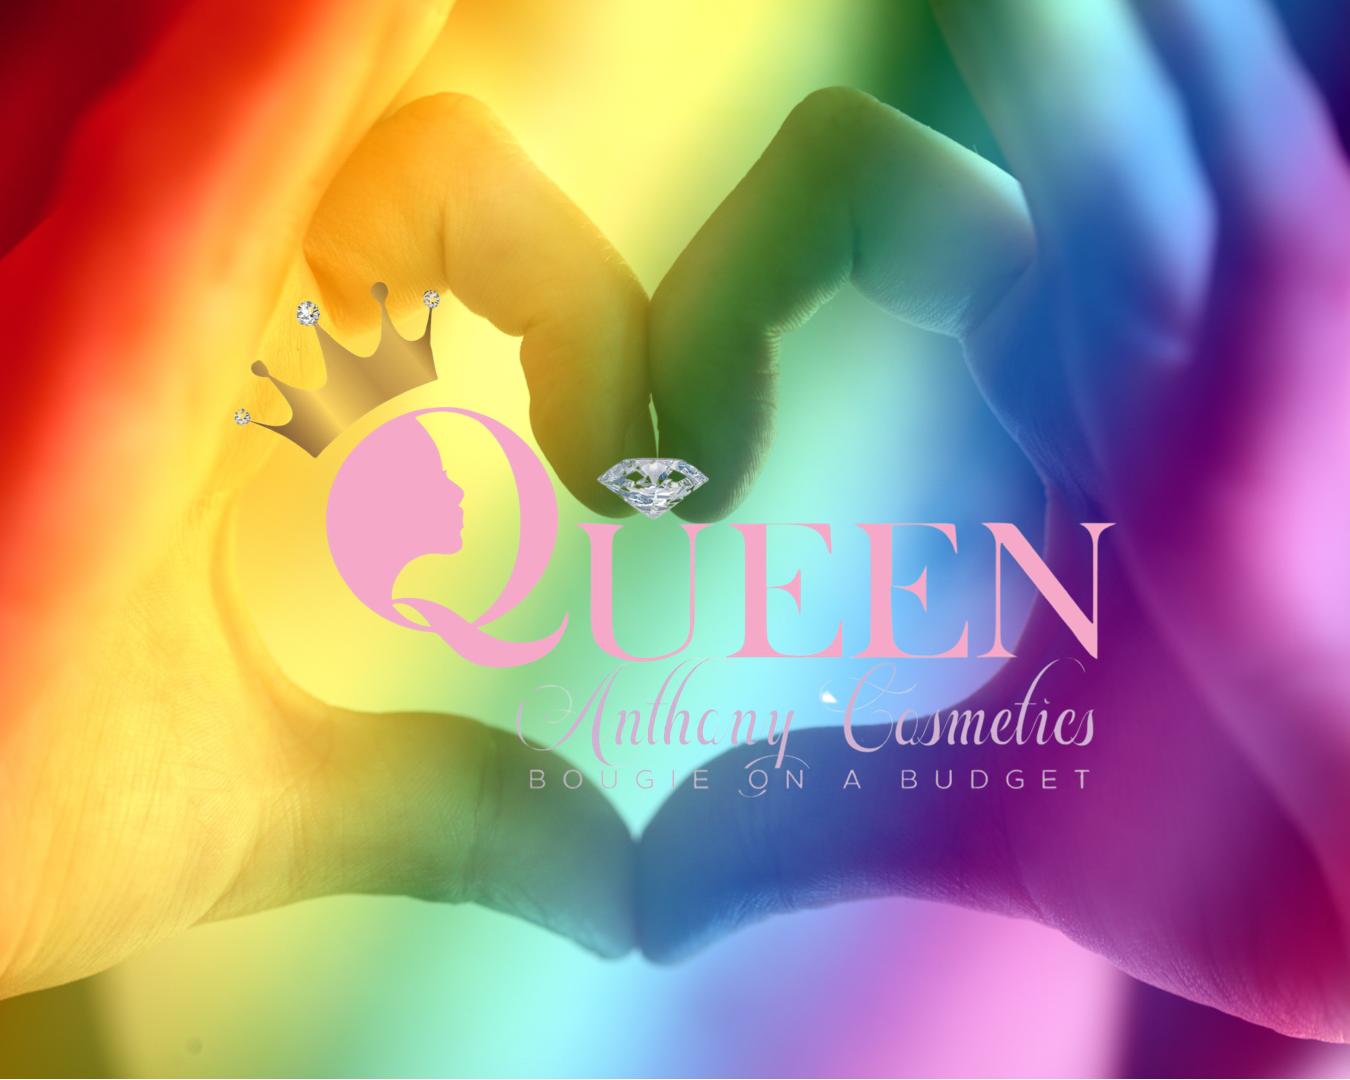 Queen Anthony cosmetics E- giftcard